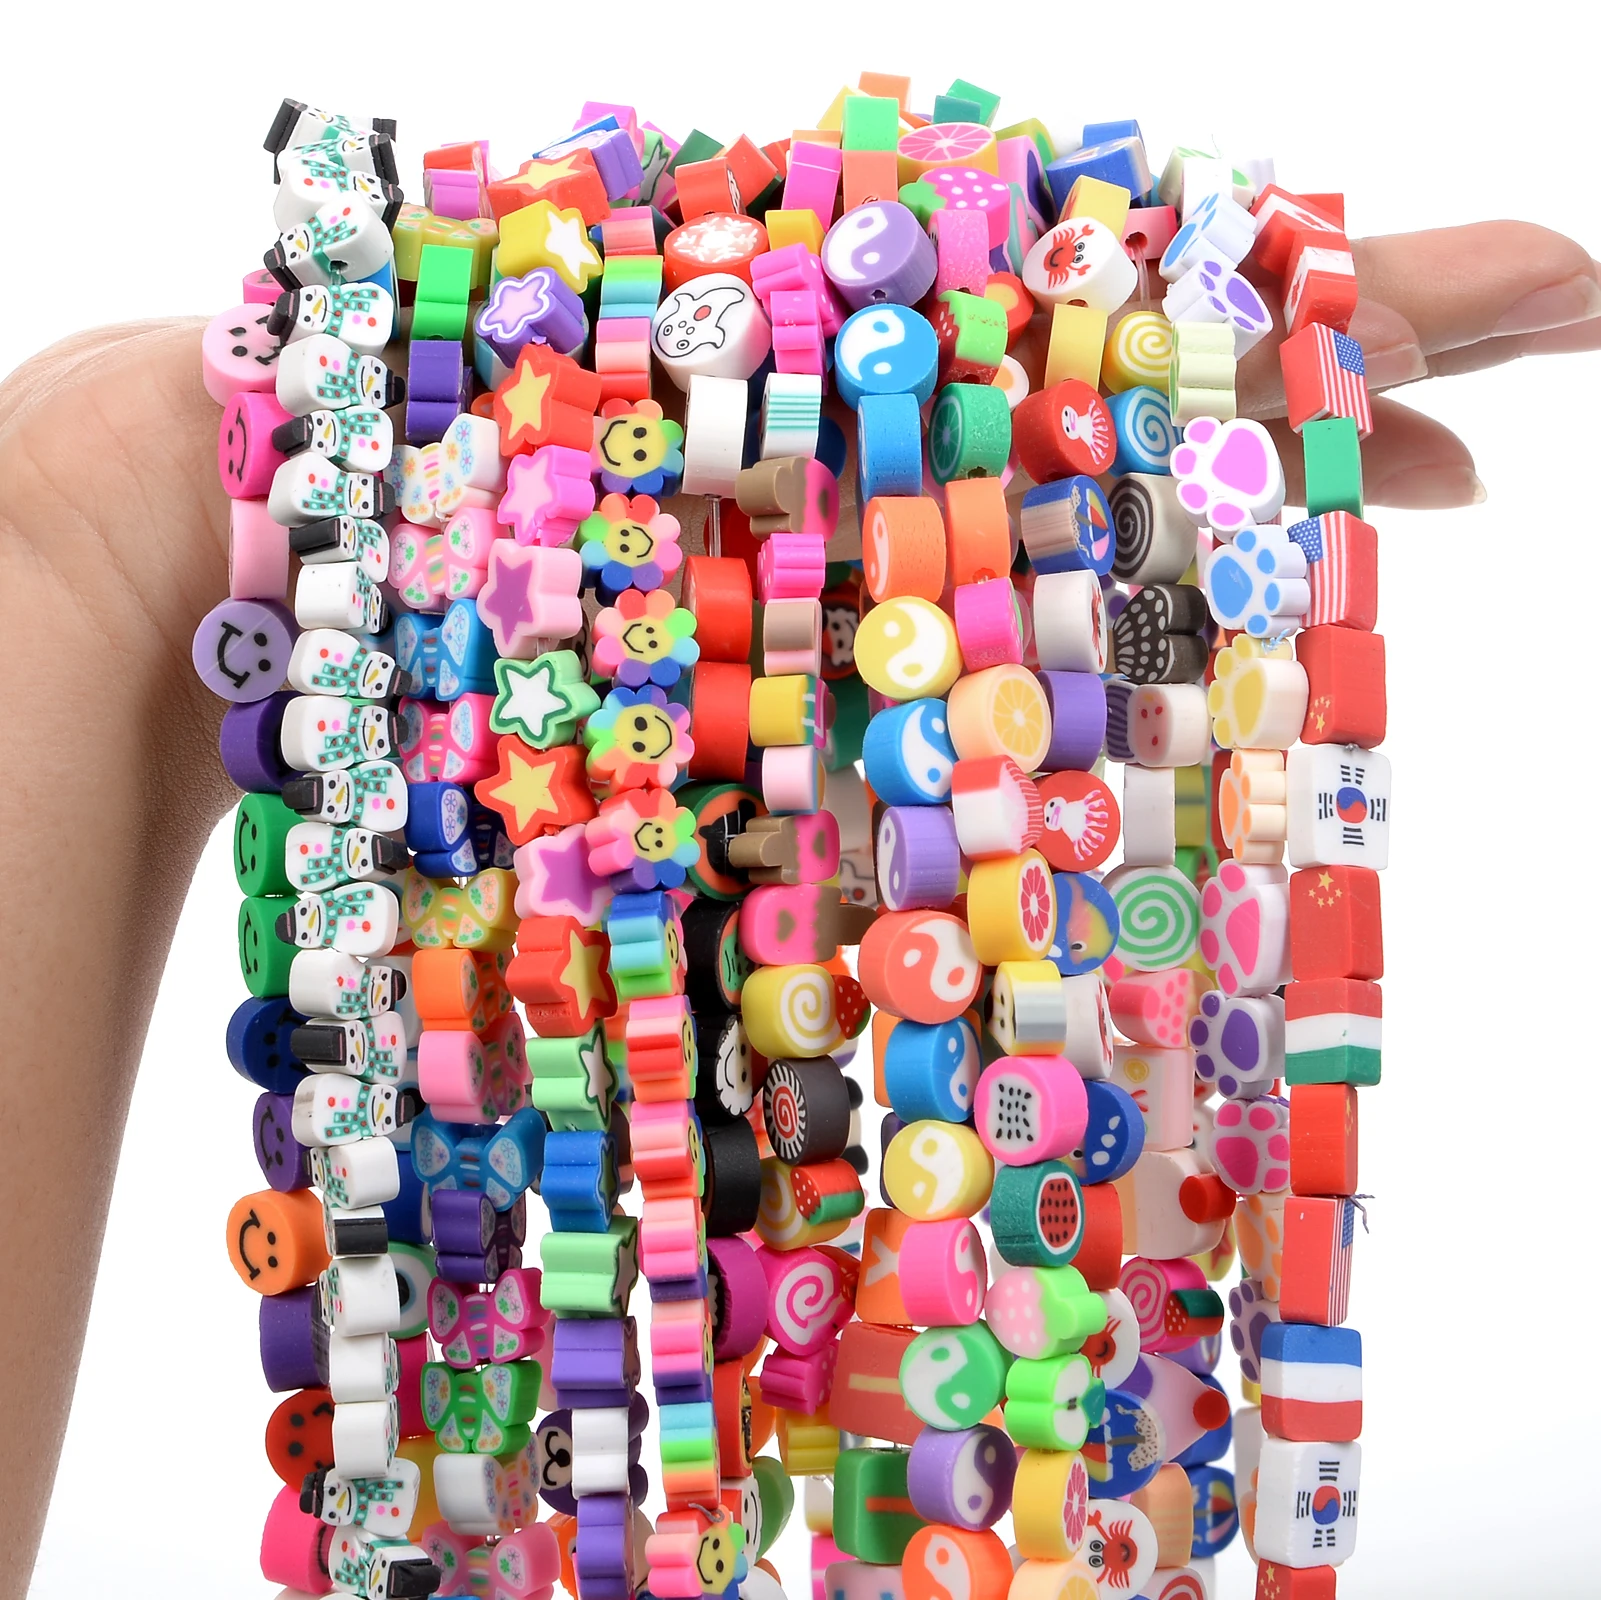 
30Pcs 10mm Polymer Clay Beads Spacer Loose Beads for Jewelry Making DIY Handmade Charm Bracelet Necklace Accessories 